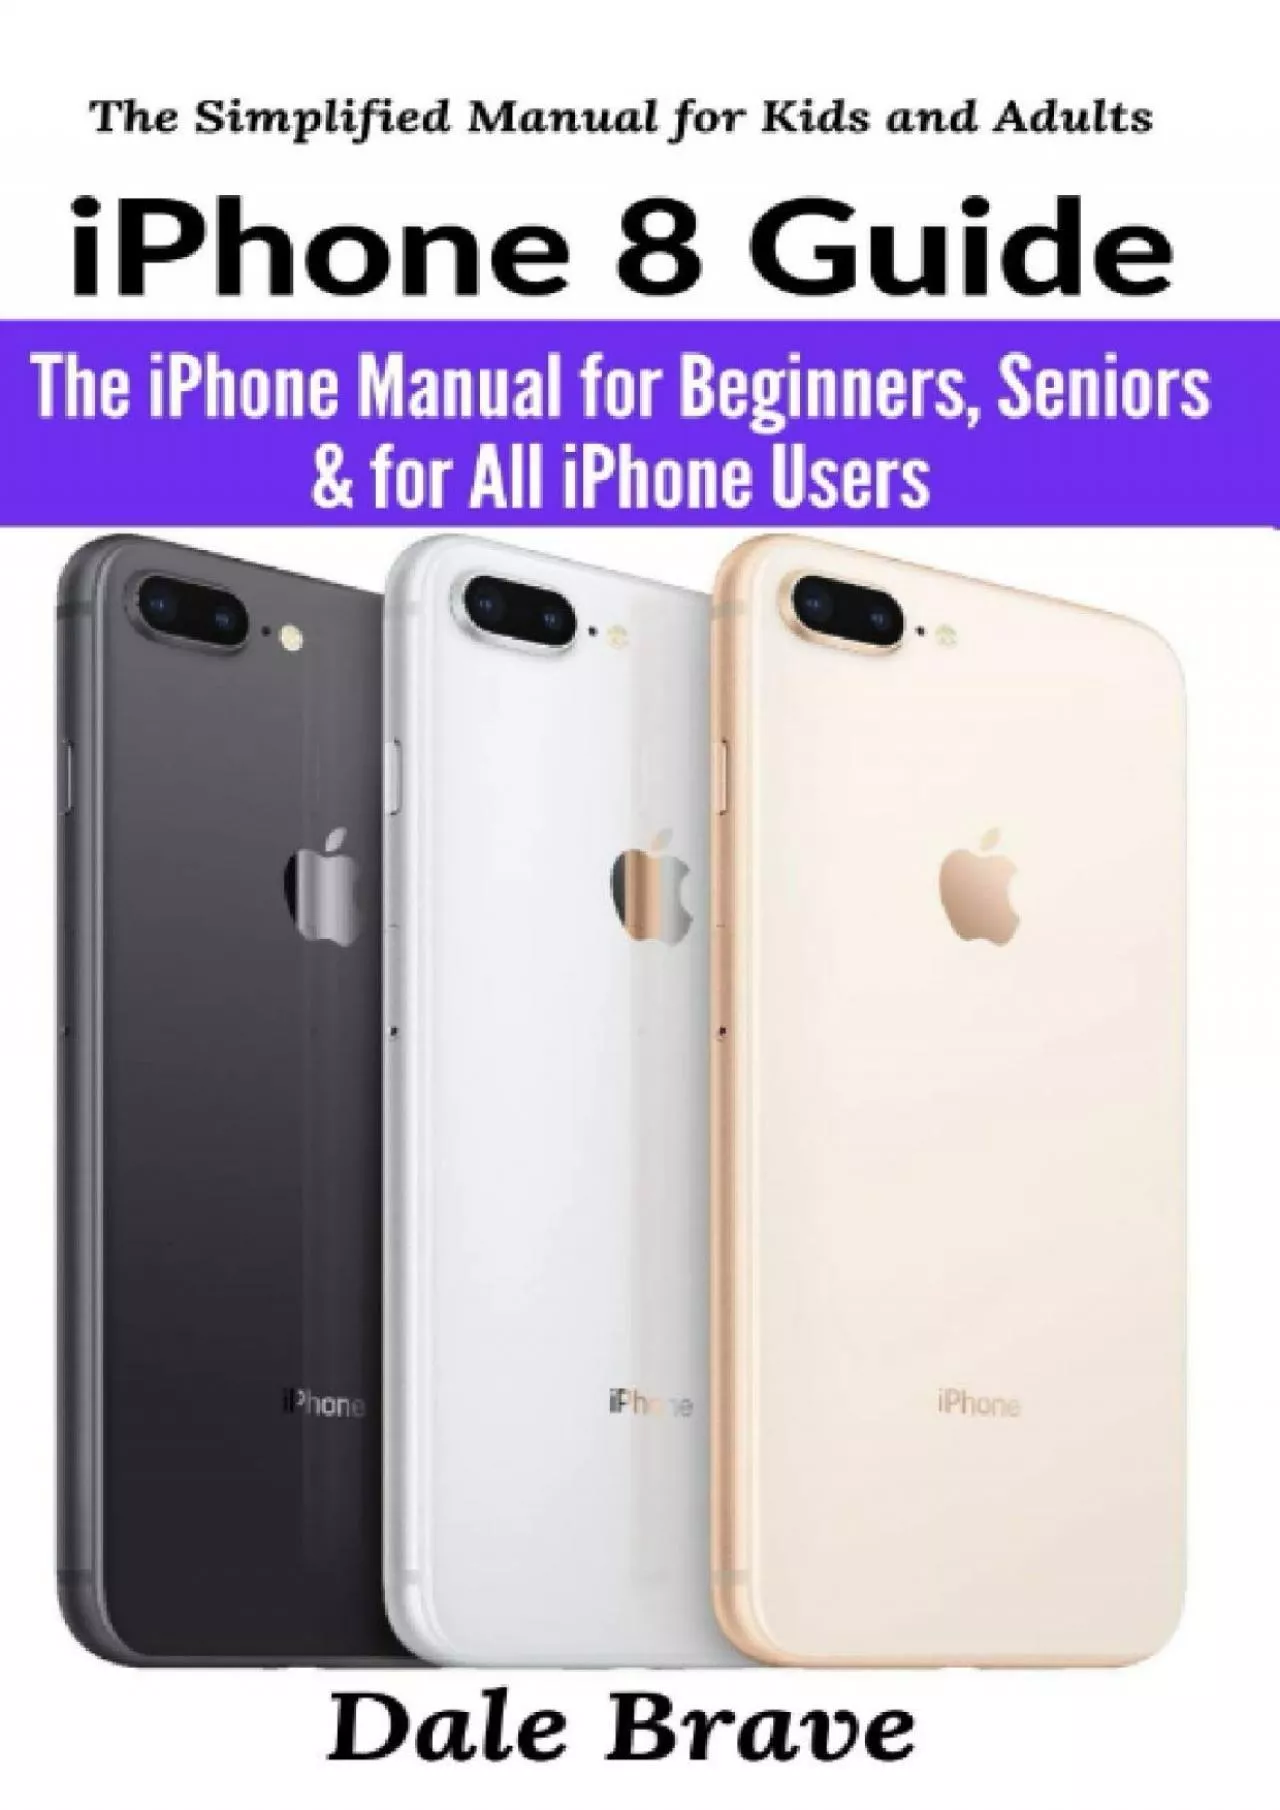 [PDF]-iPhone 8 Guide: The iPhone Manual for Beginners, Seniors  for All iPhone Users (The